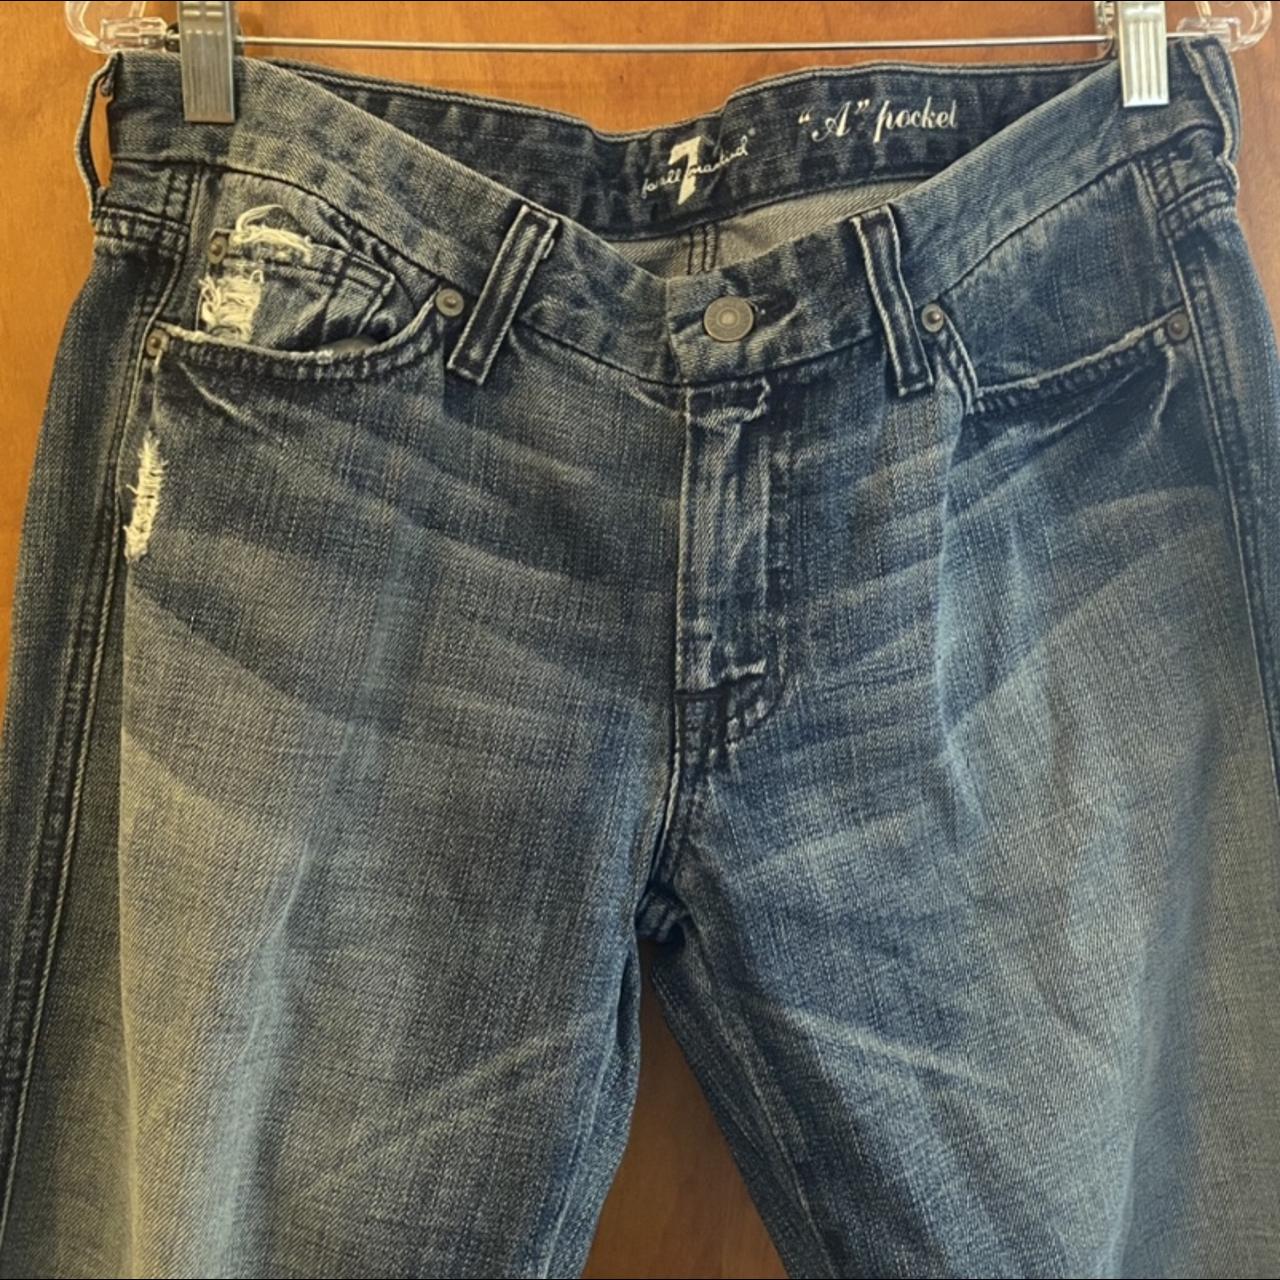 Product Image 1 - Distressed seven jeans with original